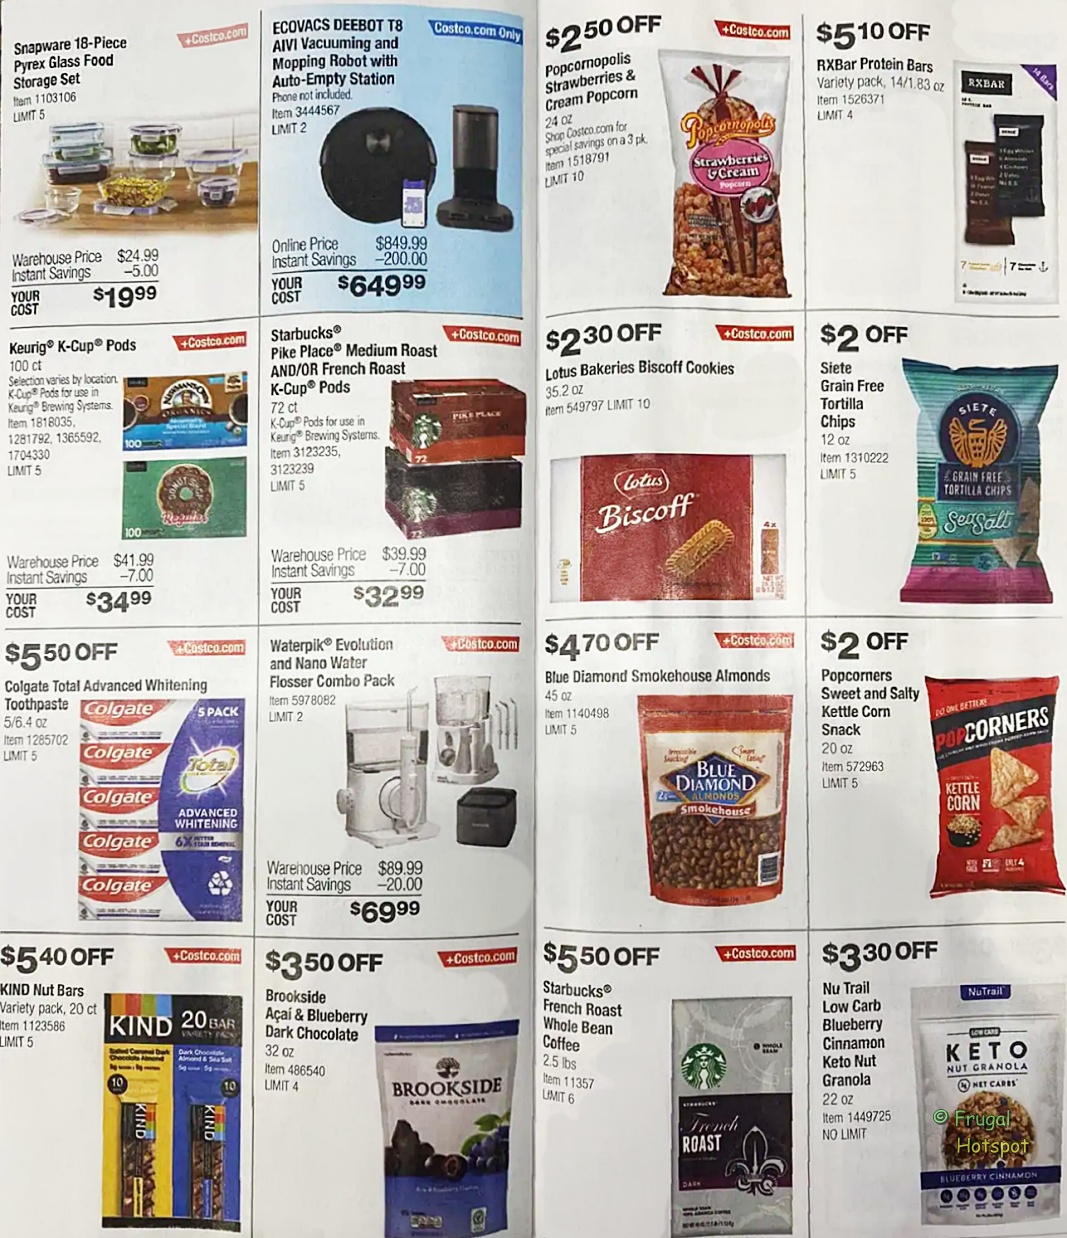 Costco Coupon Book APRIL 2022 | P 13 and 14